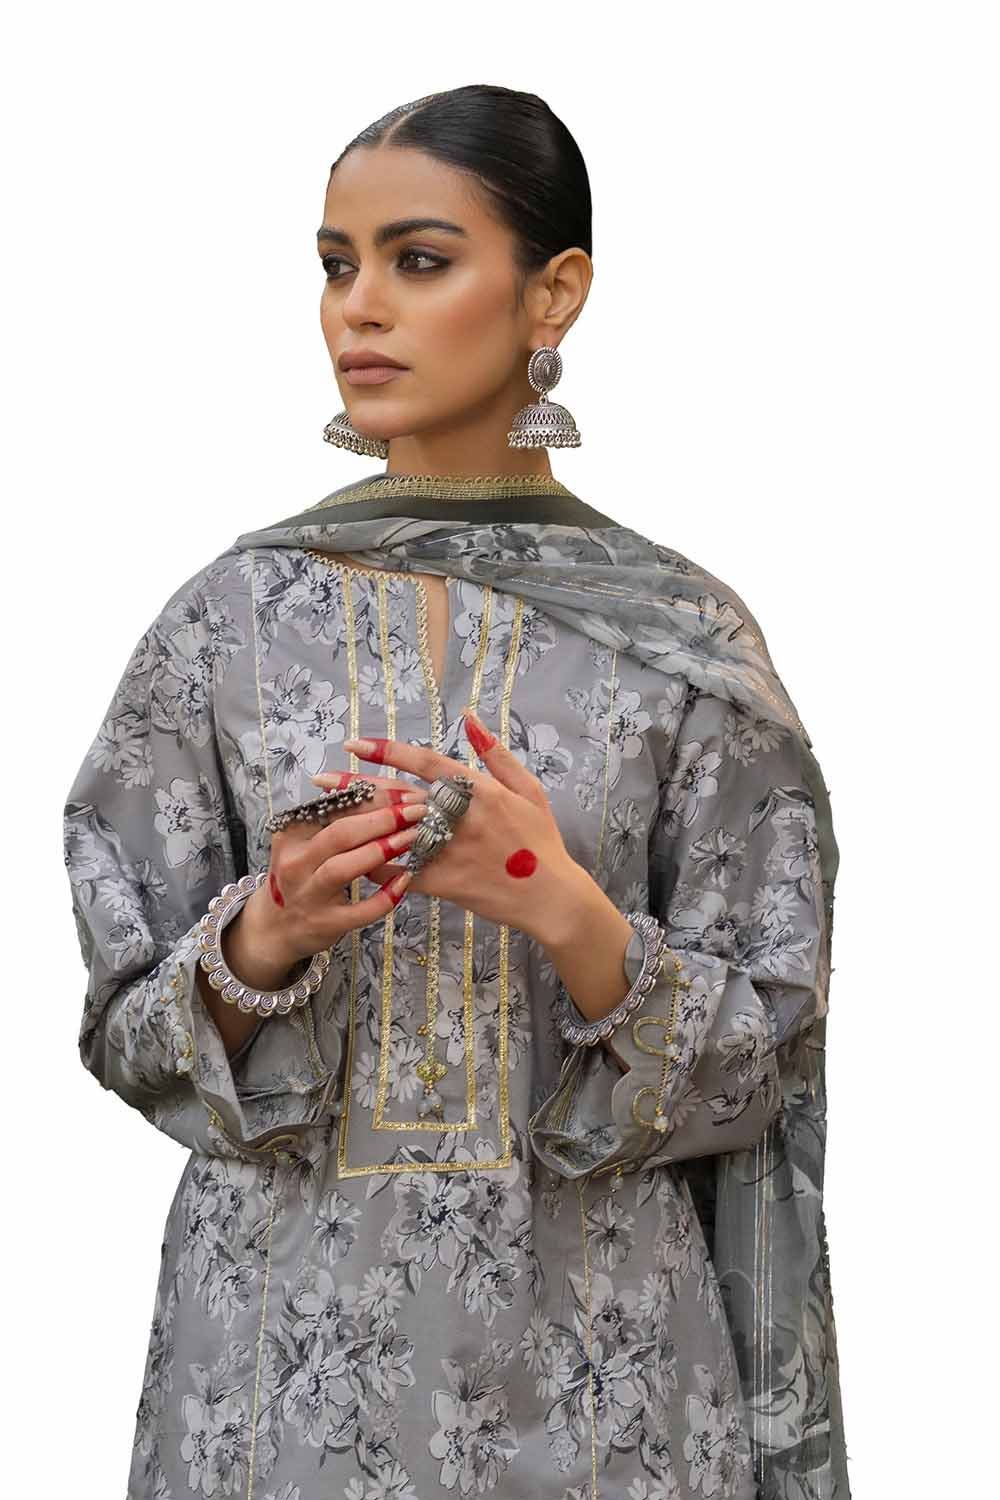 Gul Ahmed 3PC Unstitched Printed Lawn Suit with Lurex Chiffon Dupatta SP-42014